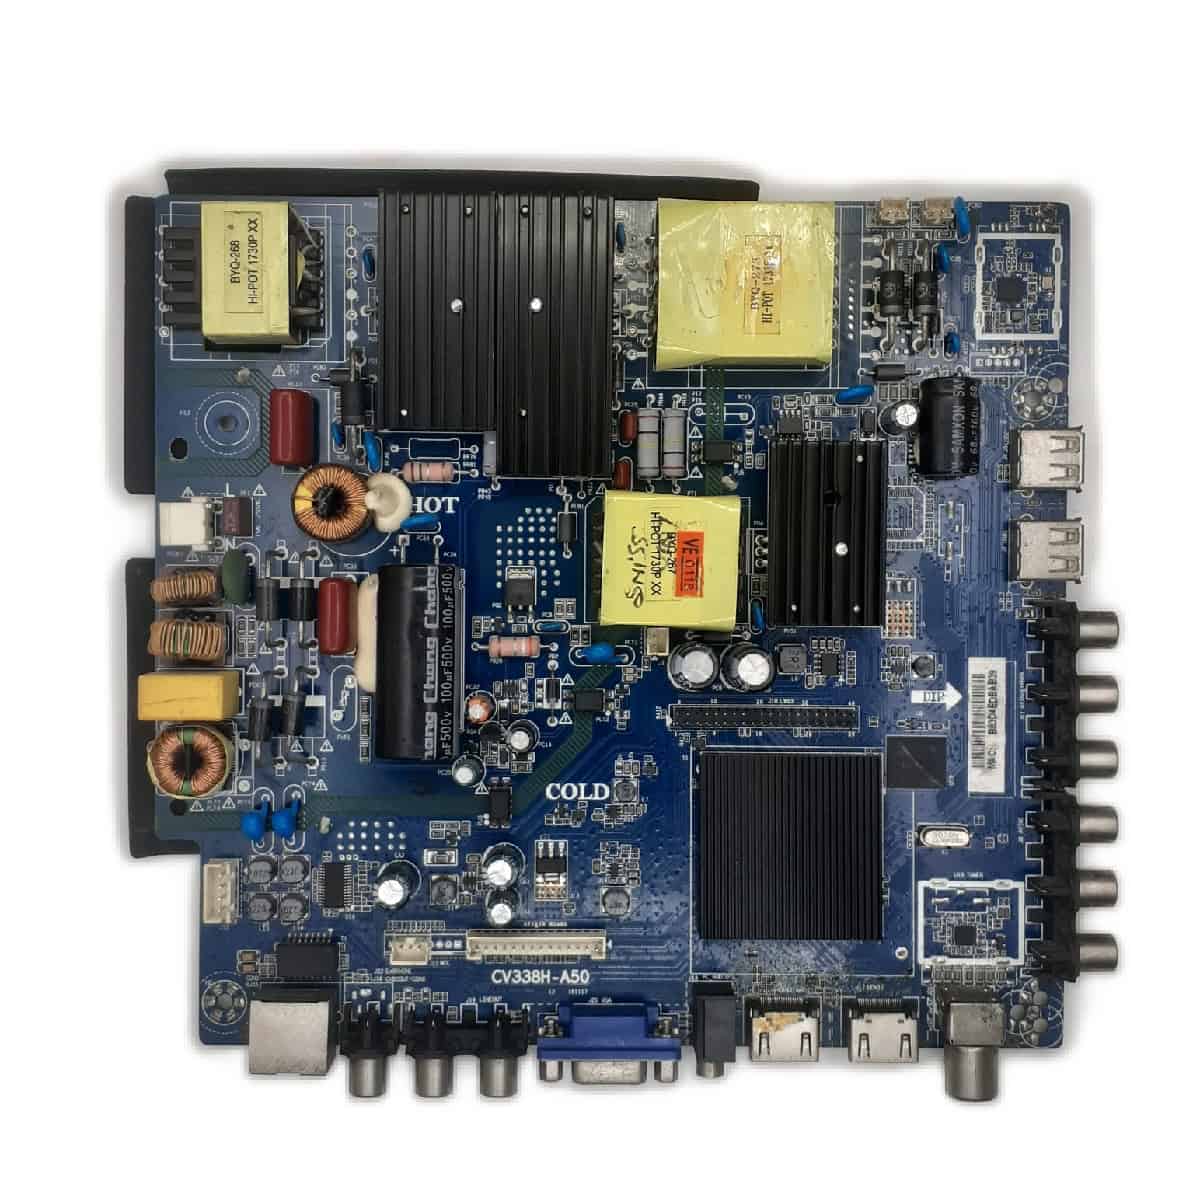 CREL7325 CROMA MOTHERBOARD FOR LED TV